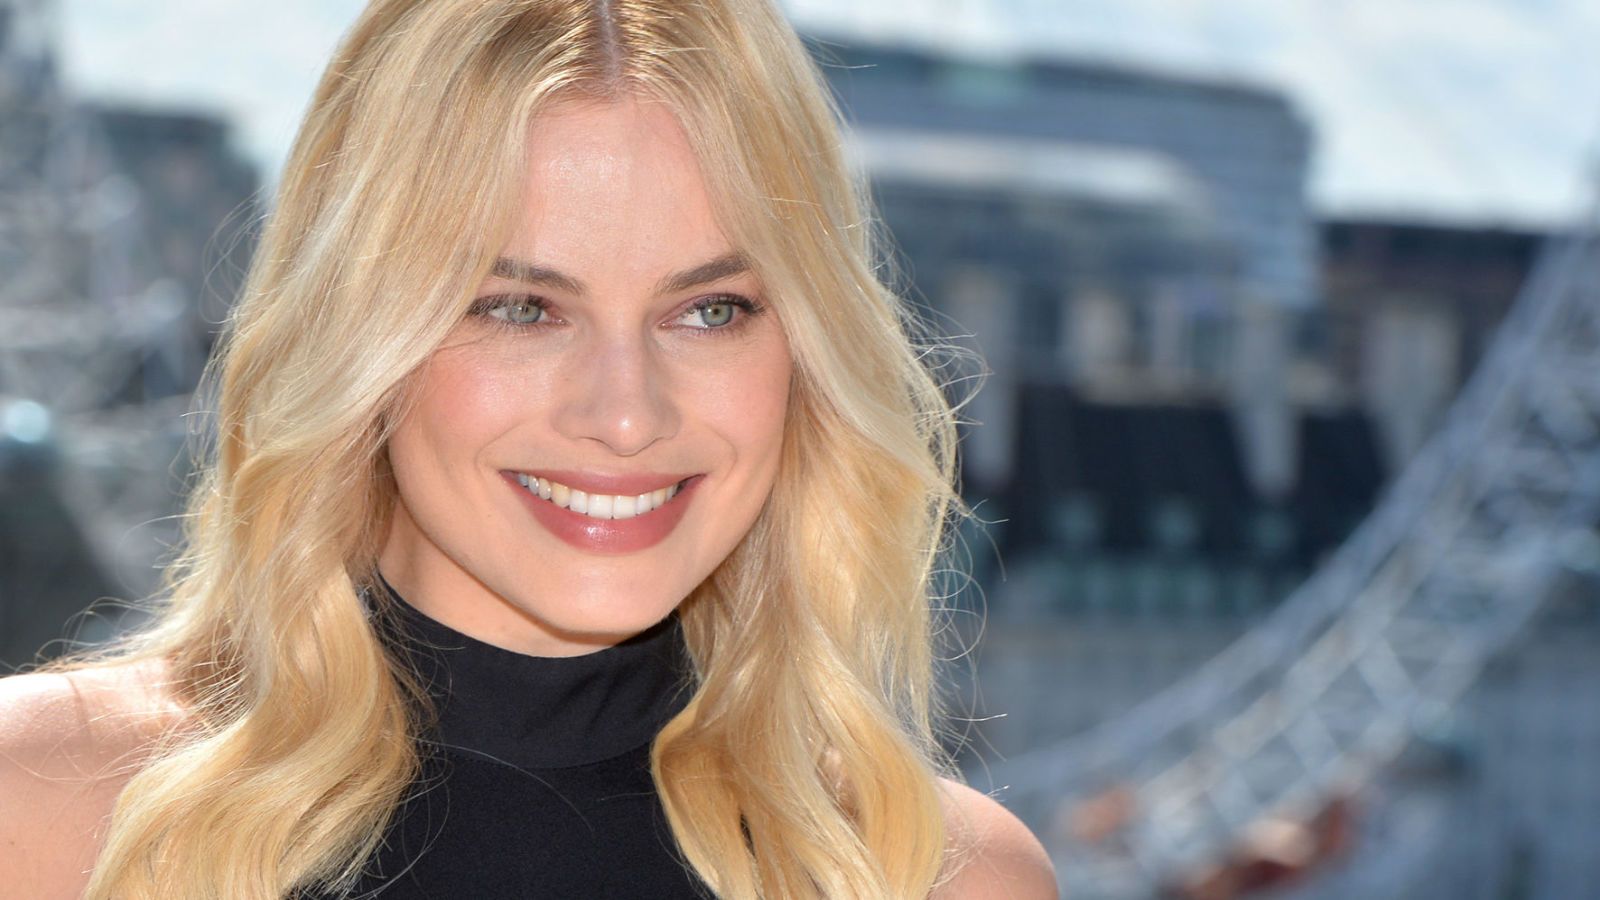 Margot Robbie wore sheer Chanel to the Amsterdam premiere and just wow